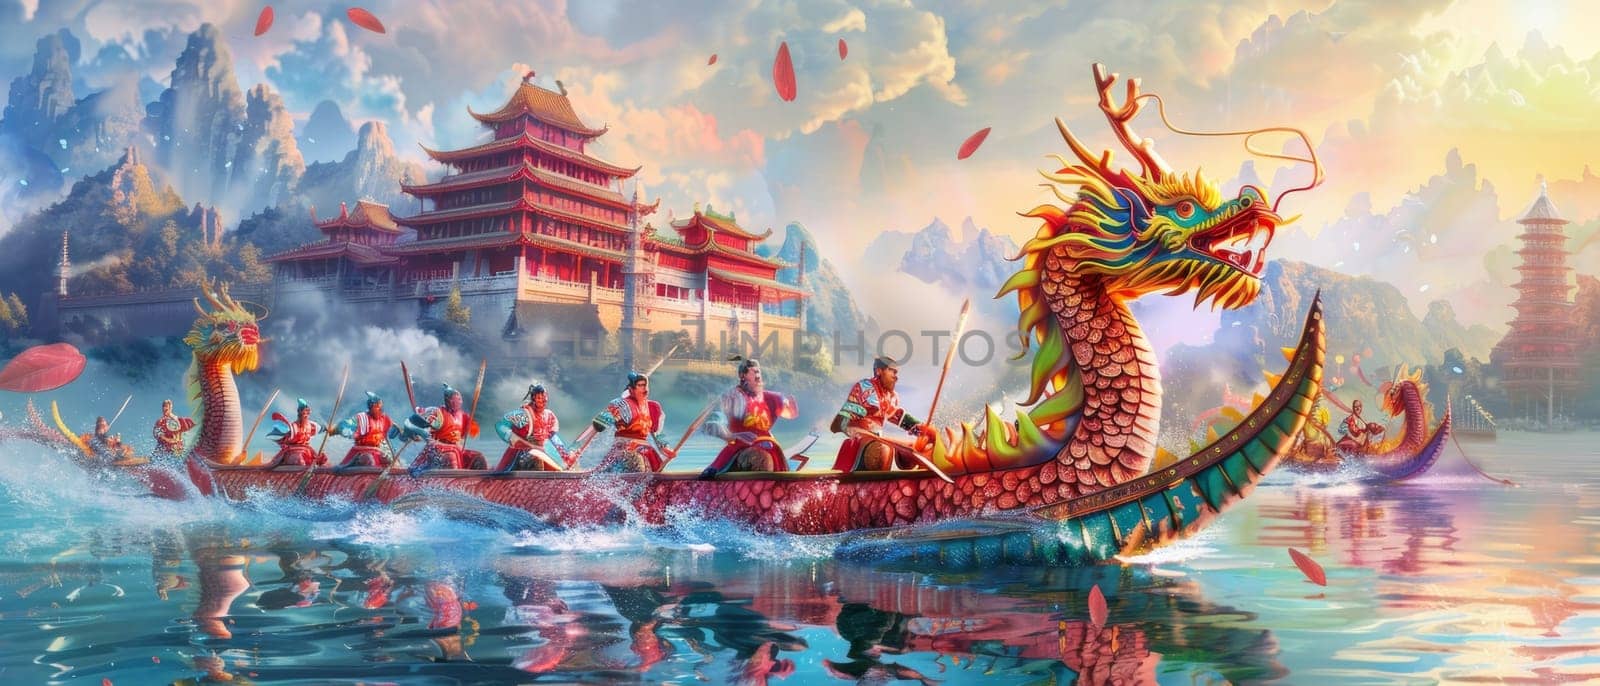 An epic scene with a dragon boat slicing through the water, rowers in sync, with a mythical dragon head leading against a traditional temple backdrop. by sfinks